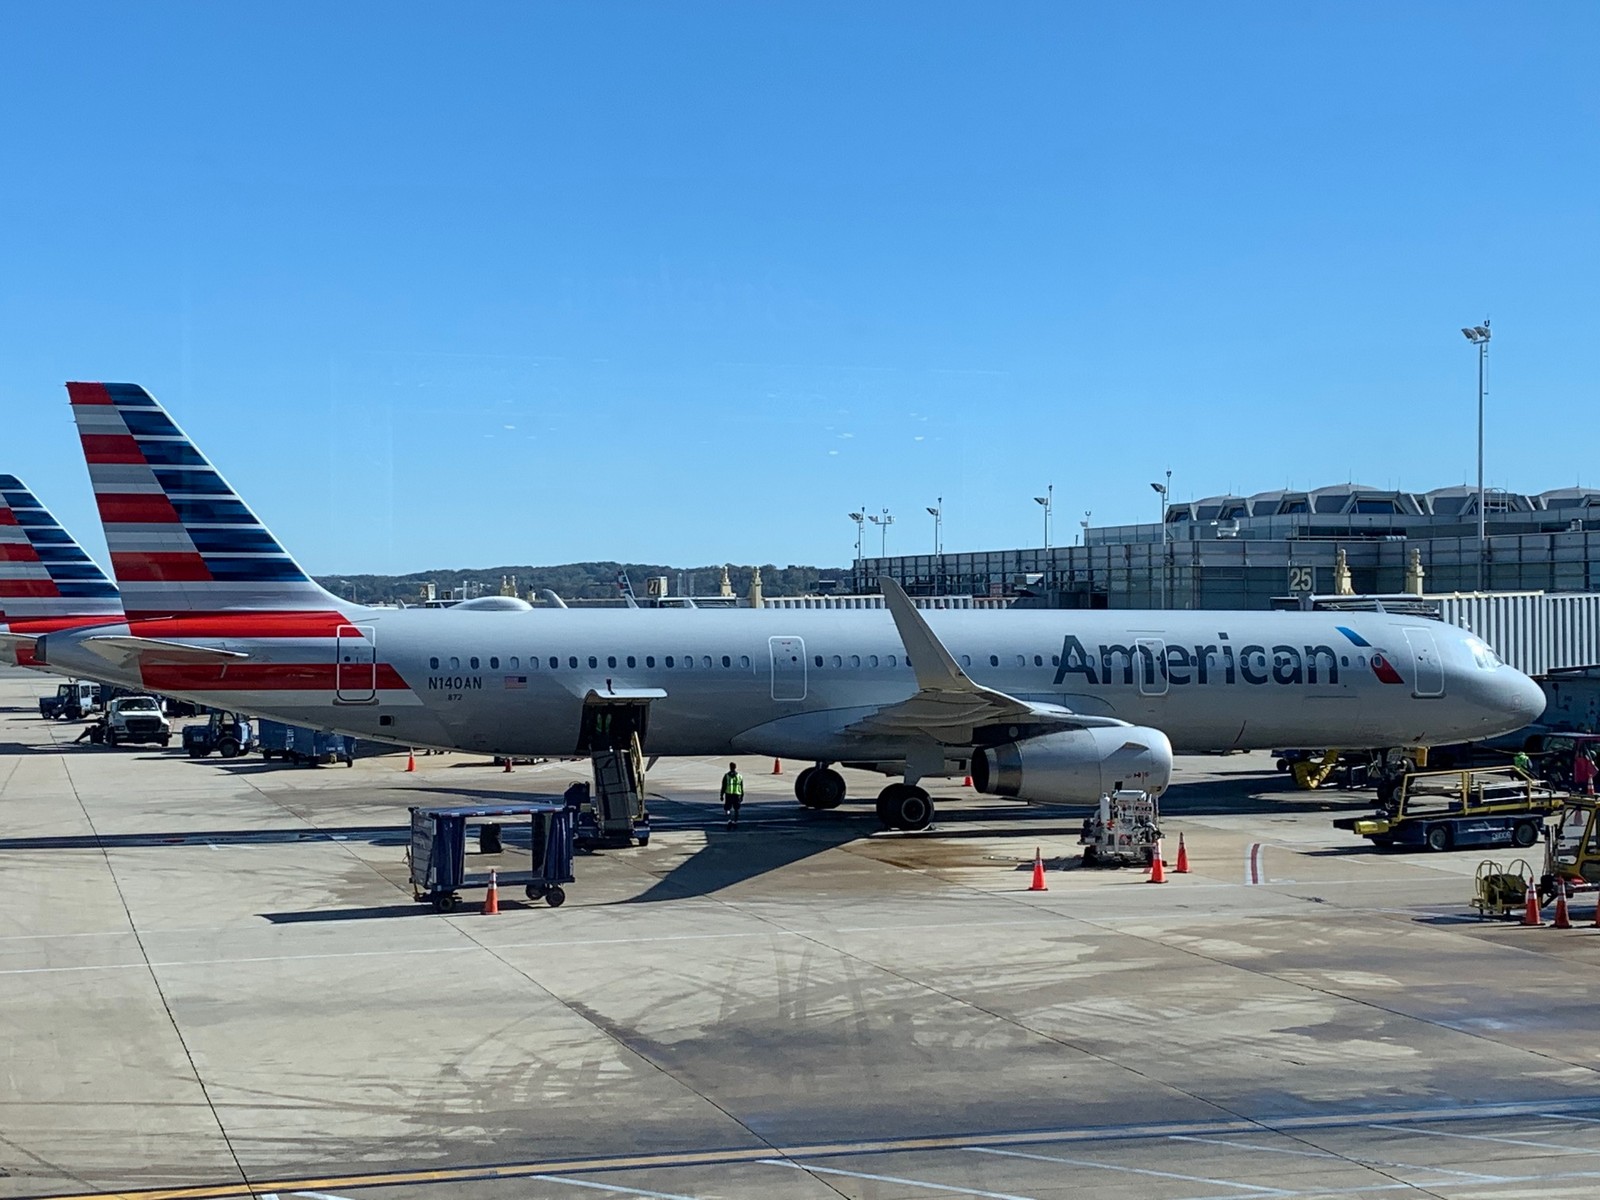 American Airlines Personal Card Comparison